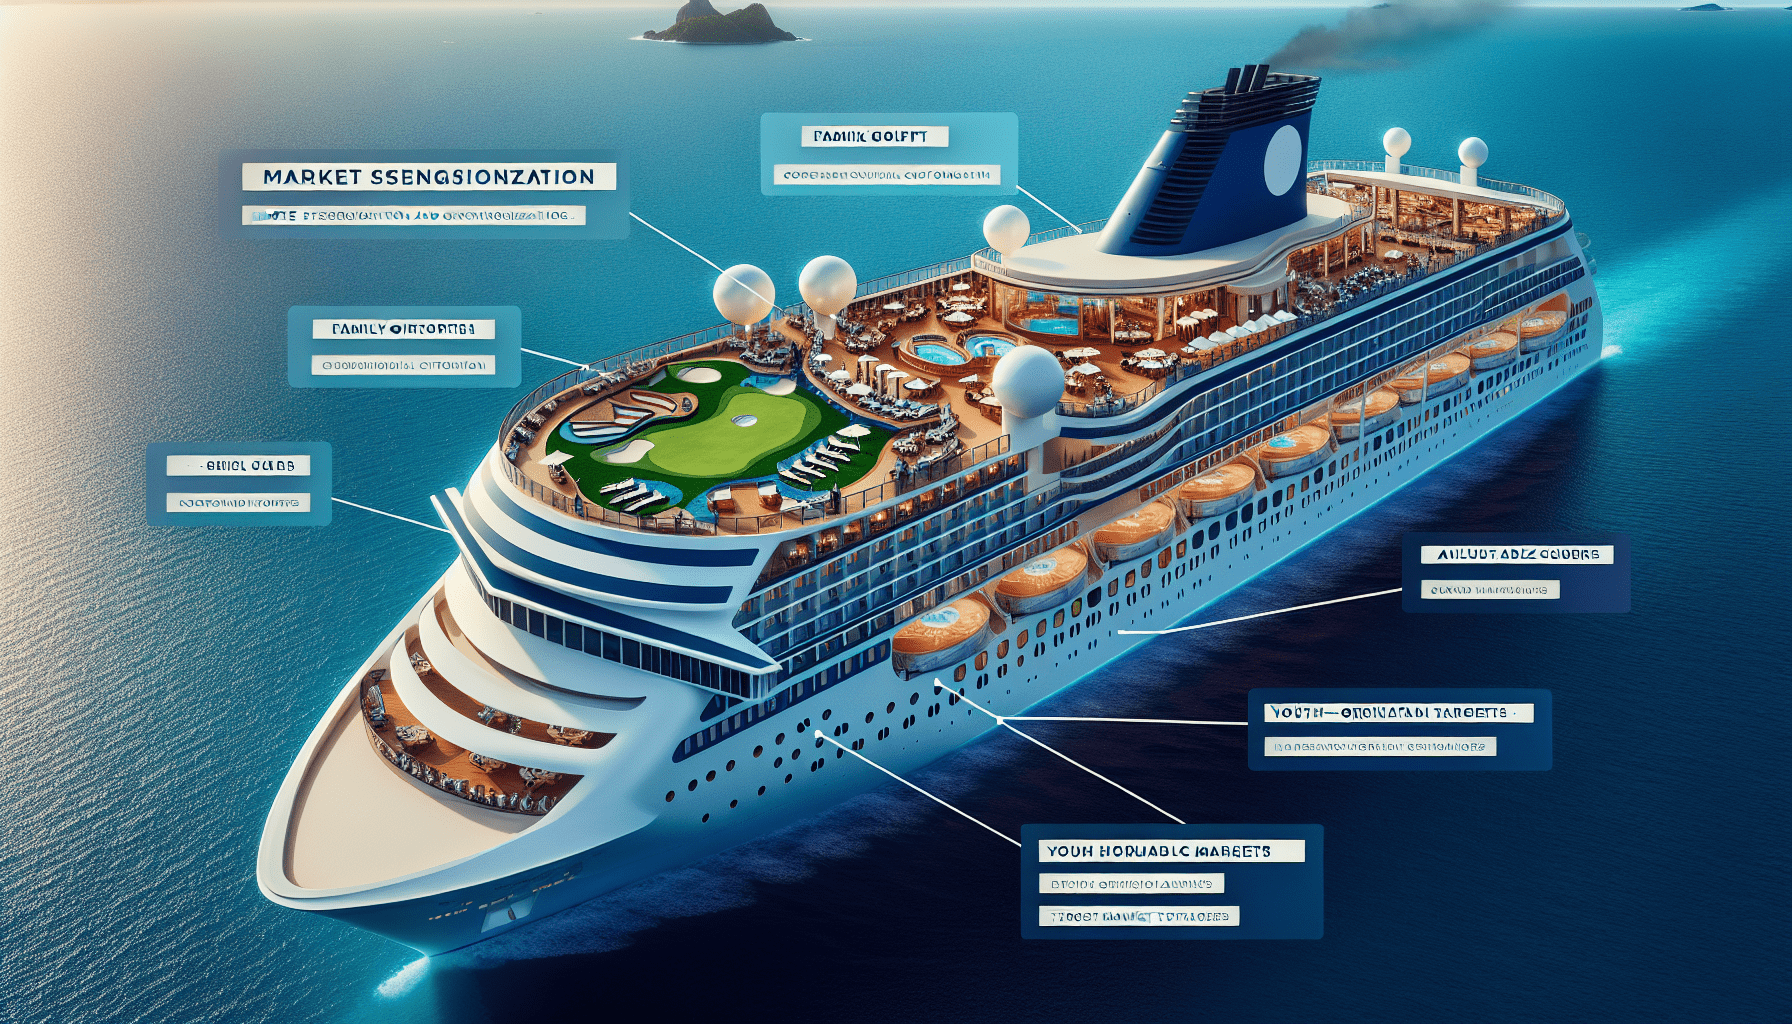 How Do Cruise Ships Target Specific Markets?